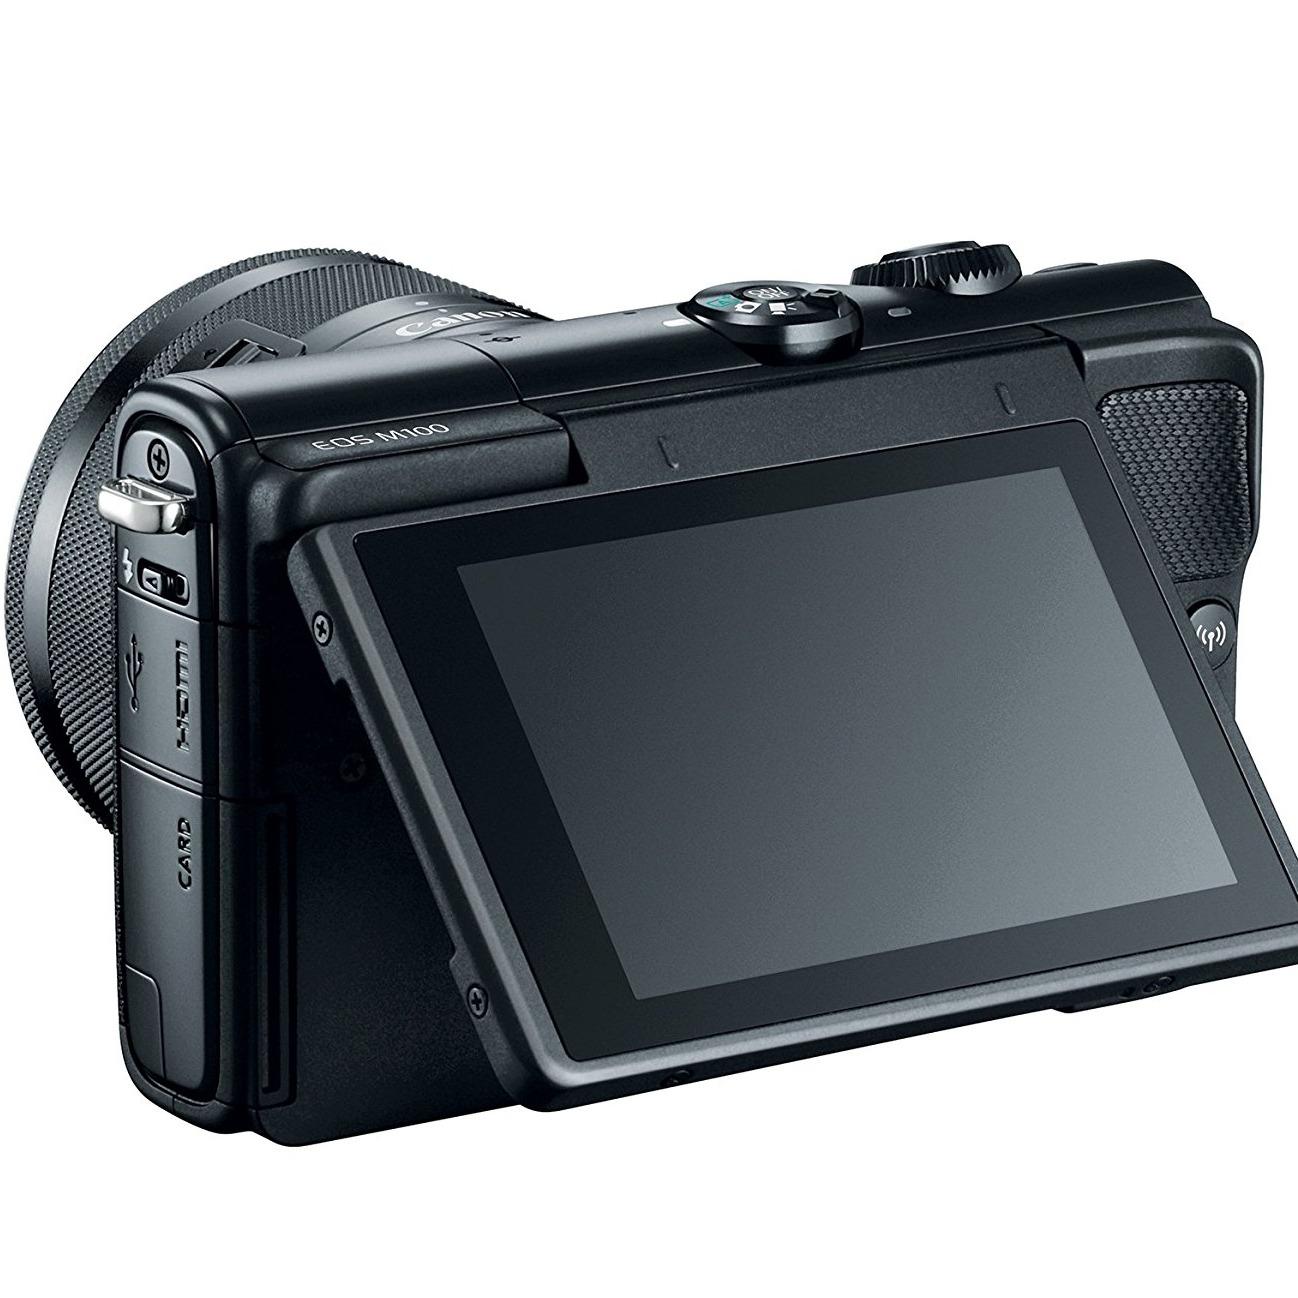 Canon EOS M100 Mirrorless Digital Camera with 15-45mm Lens